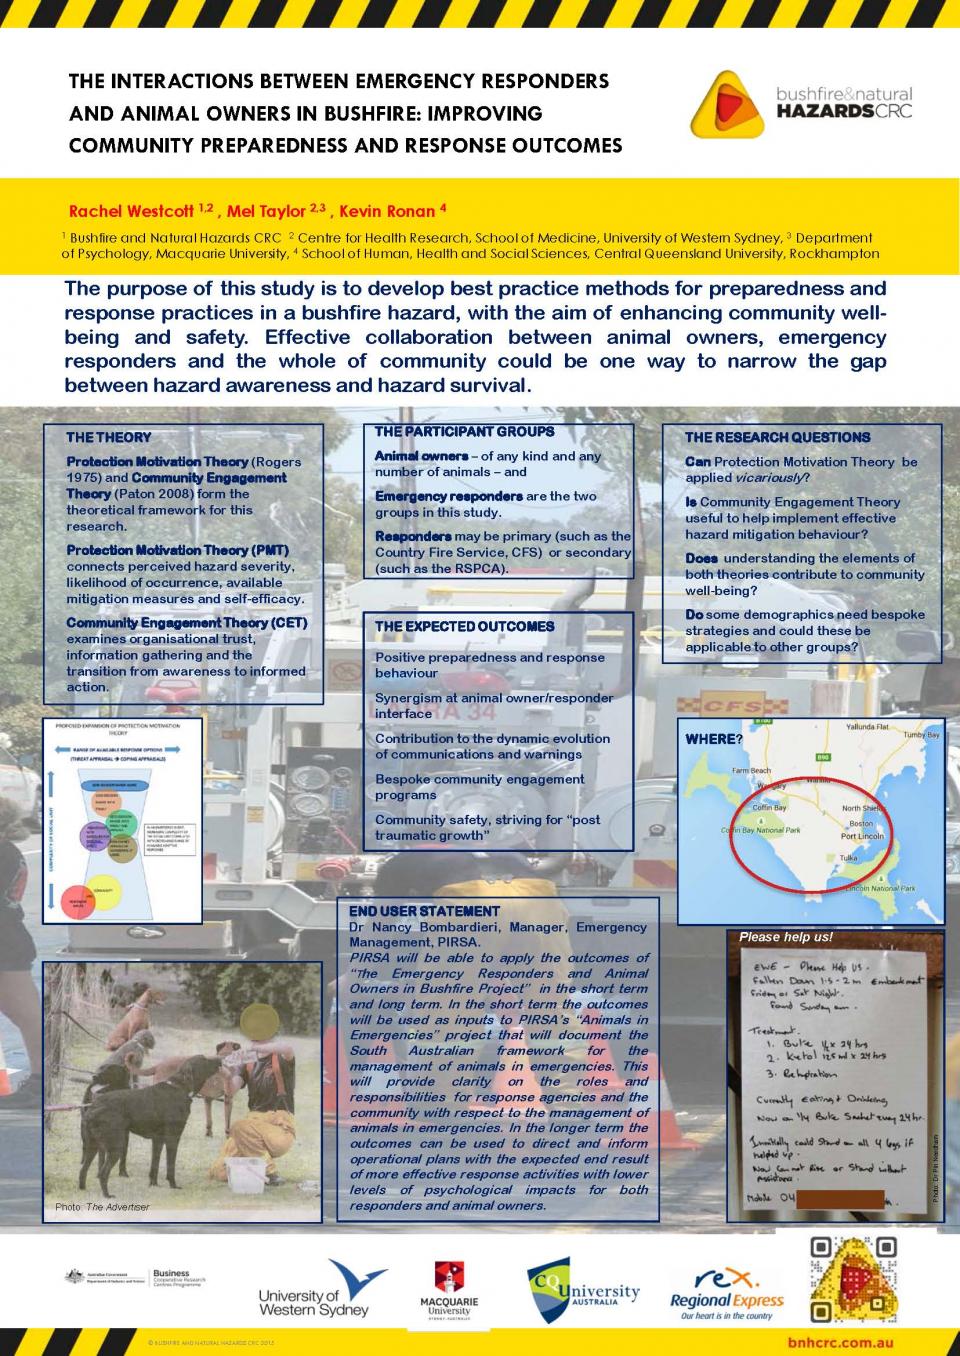 The Interactions Between Emergency Responders and Animal Owners in Bushfire: Improving Community Preparedness and Response Outcomes